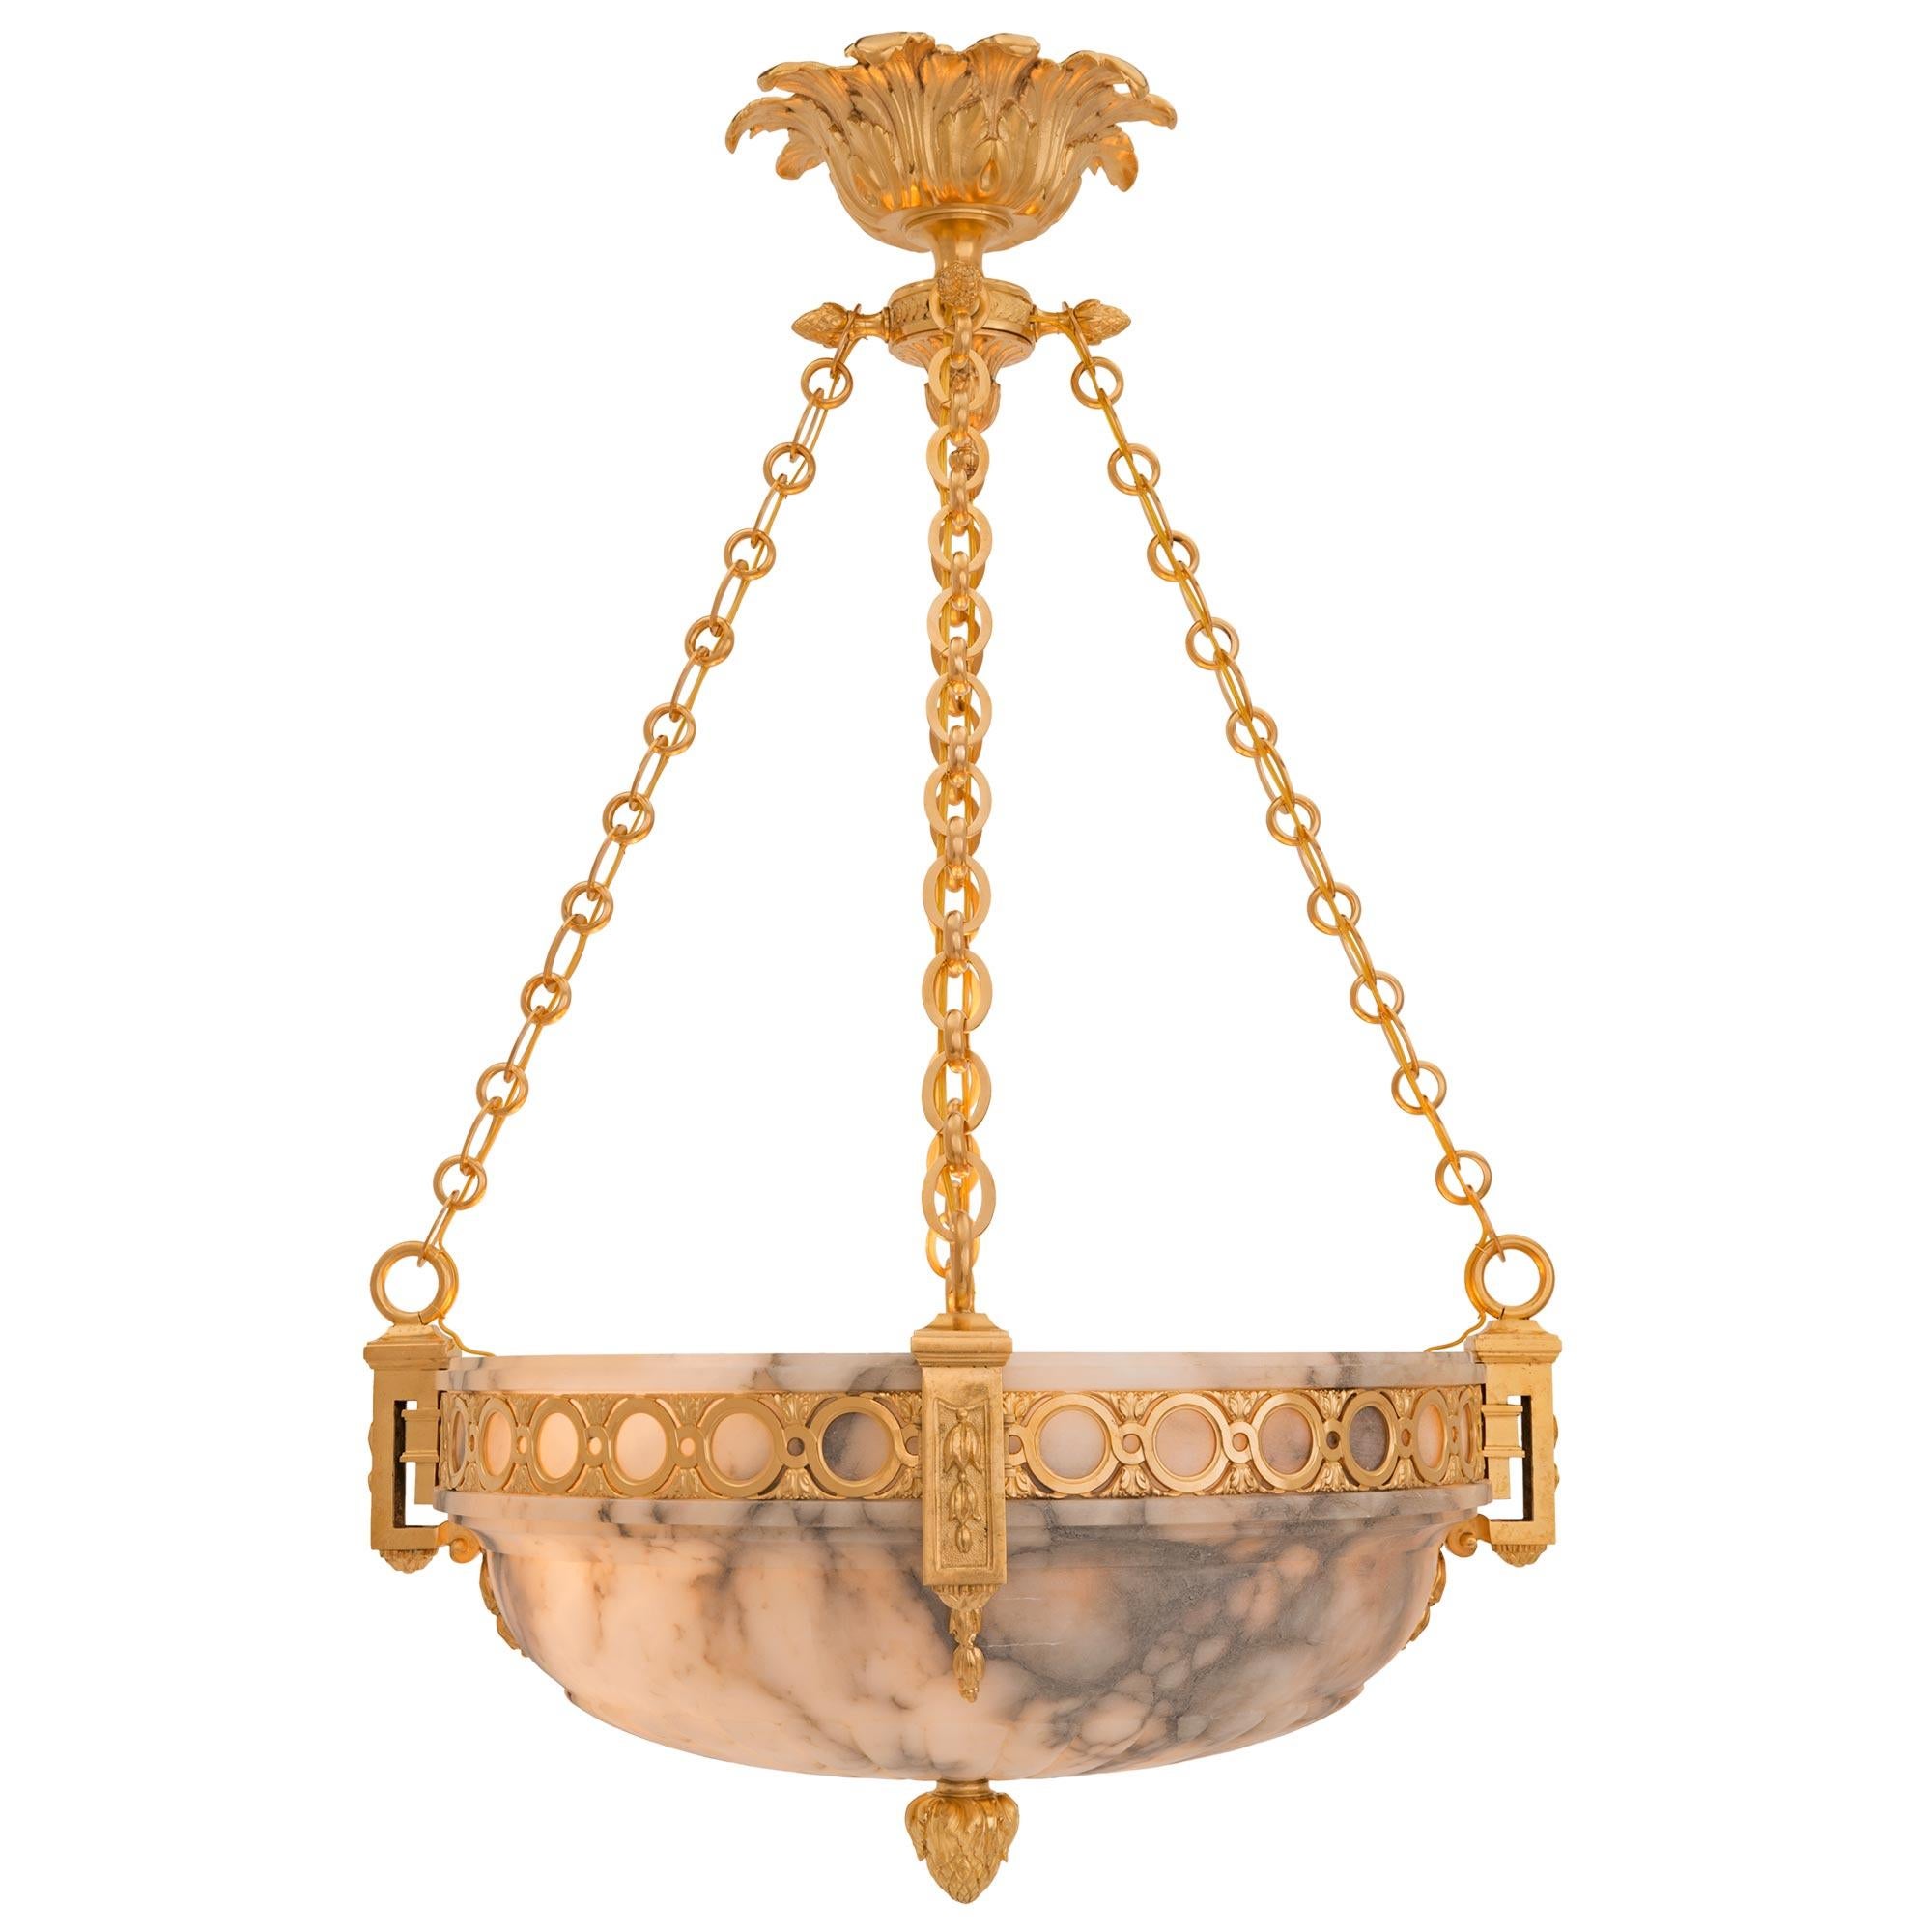 A stunning French 19th century Louis XVI st. alabaster and ormolu chandelier. The chandelier is centered by a richly chased acorn finial below the impressive alabaster bowl with a wonderfully sculpted reeded design. The bowl displays striking finely